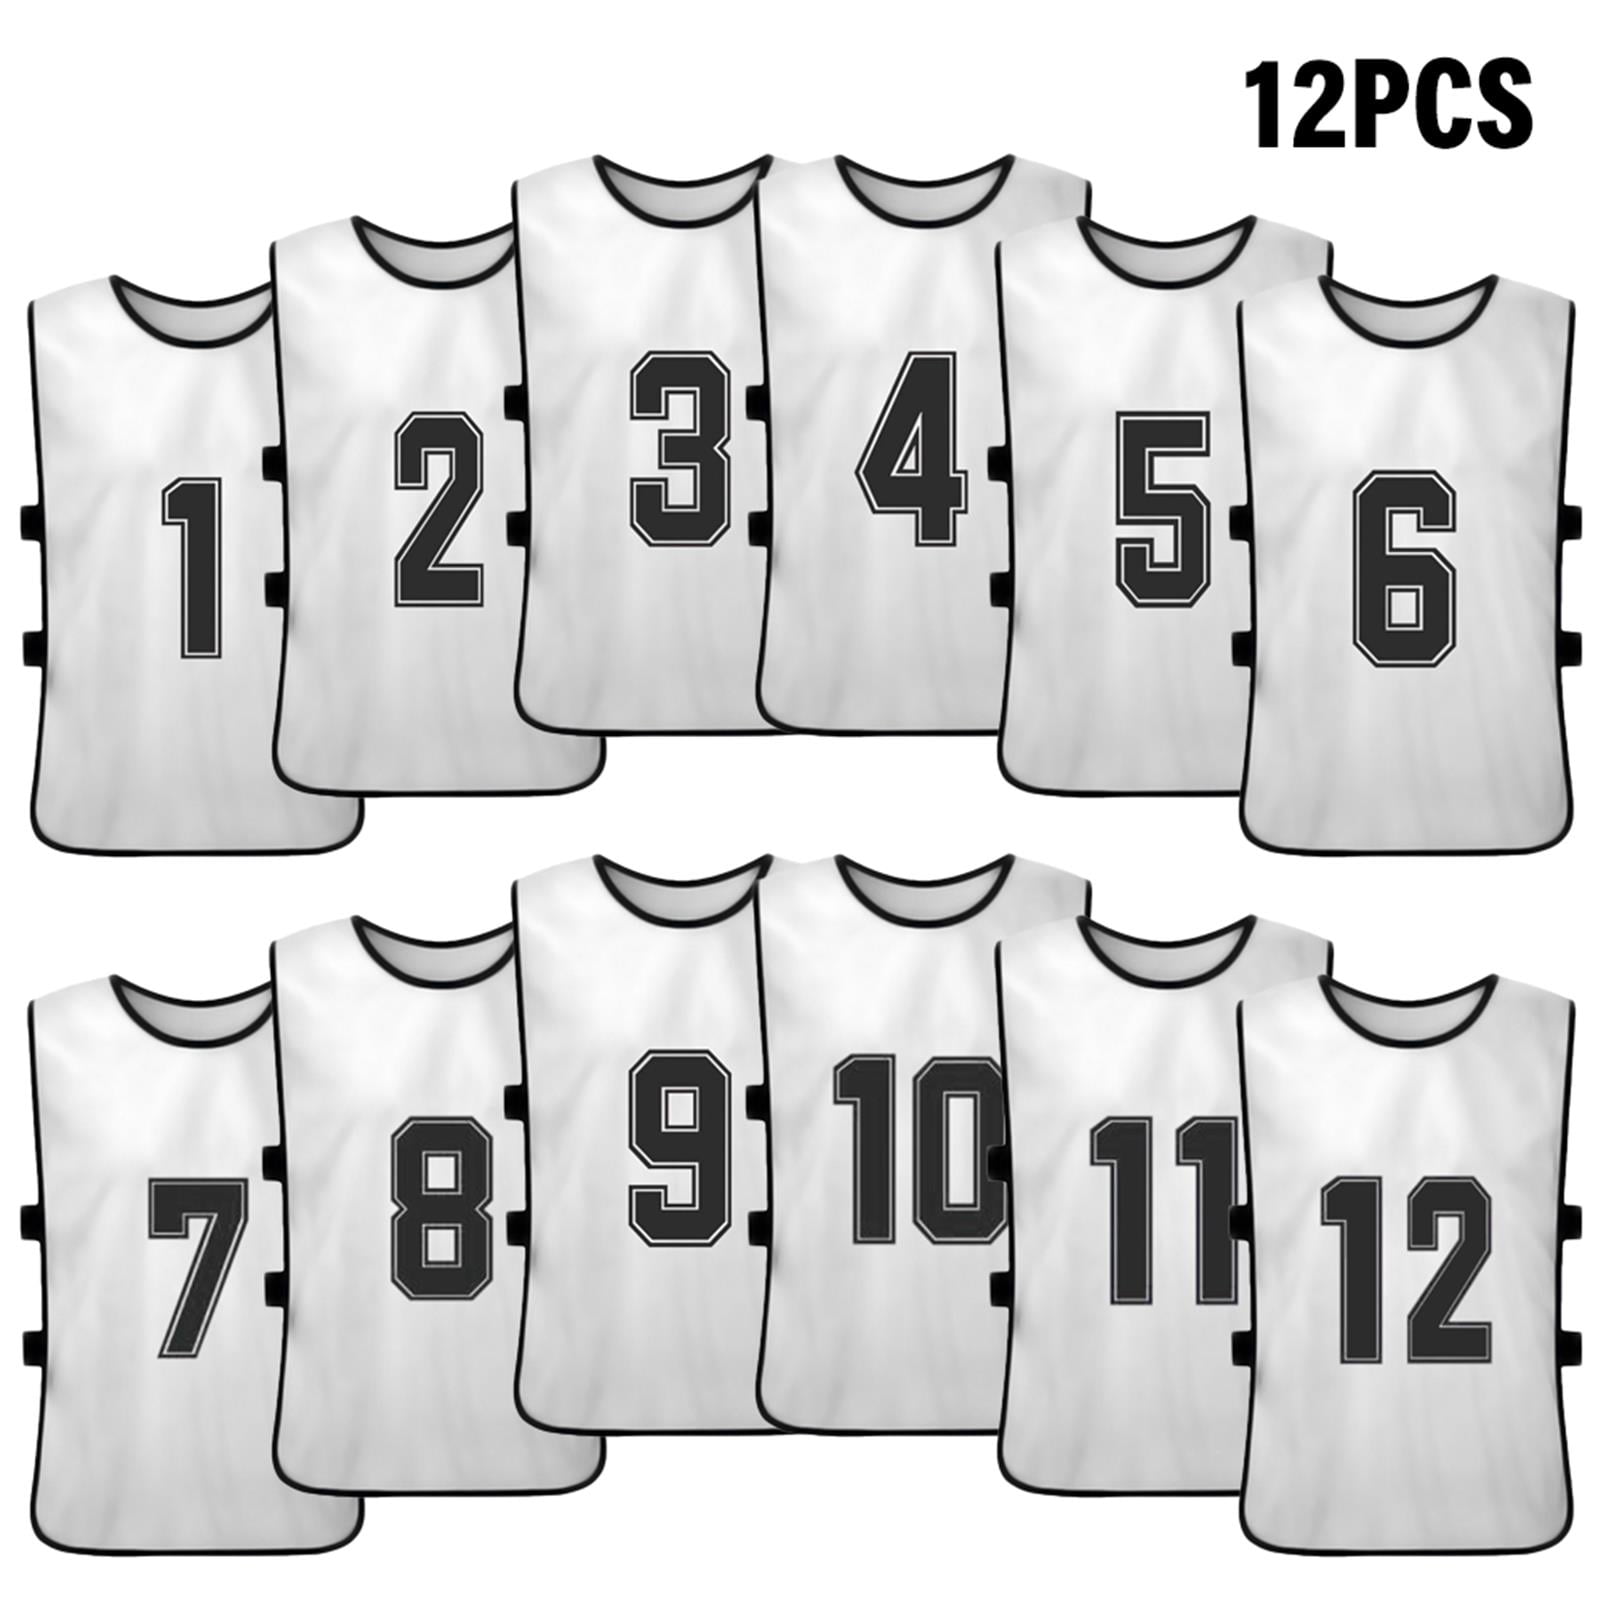 Meterk 12 PCS Kid's Football Pinnies 2 Colors Quick Drying Soccer Jerseys  Youth Sports Scrimmage Basketball Team Training Numbered Bibs Practice  Sports Vest 